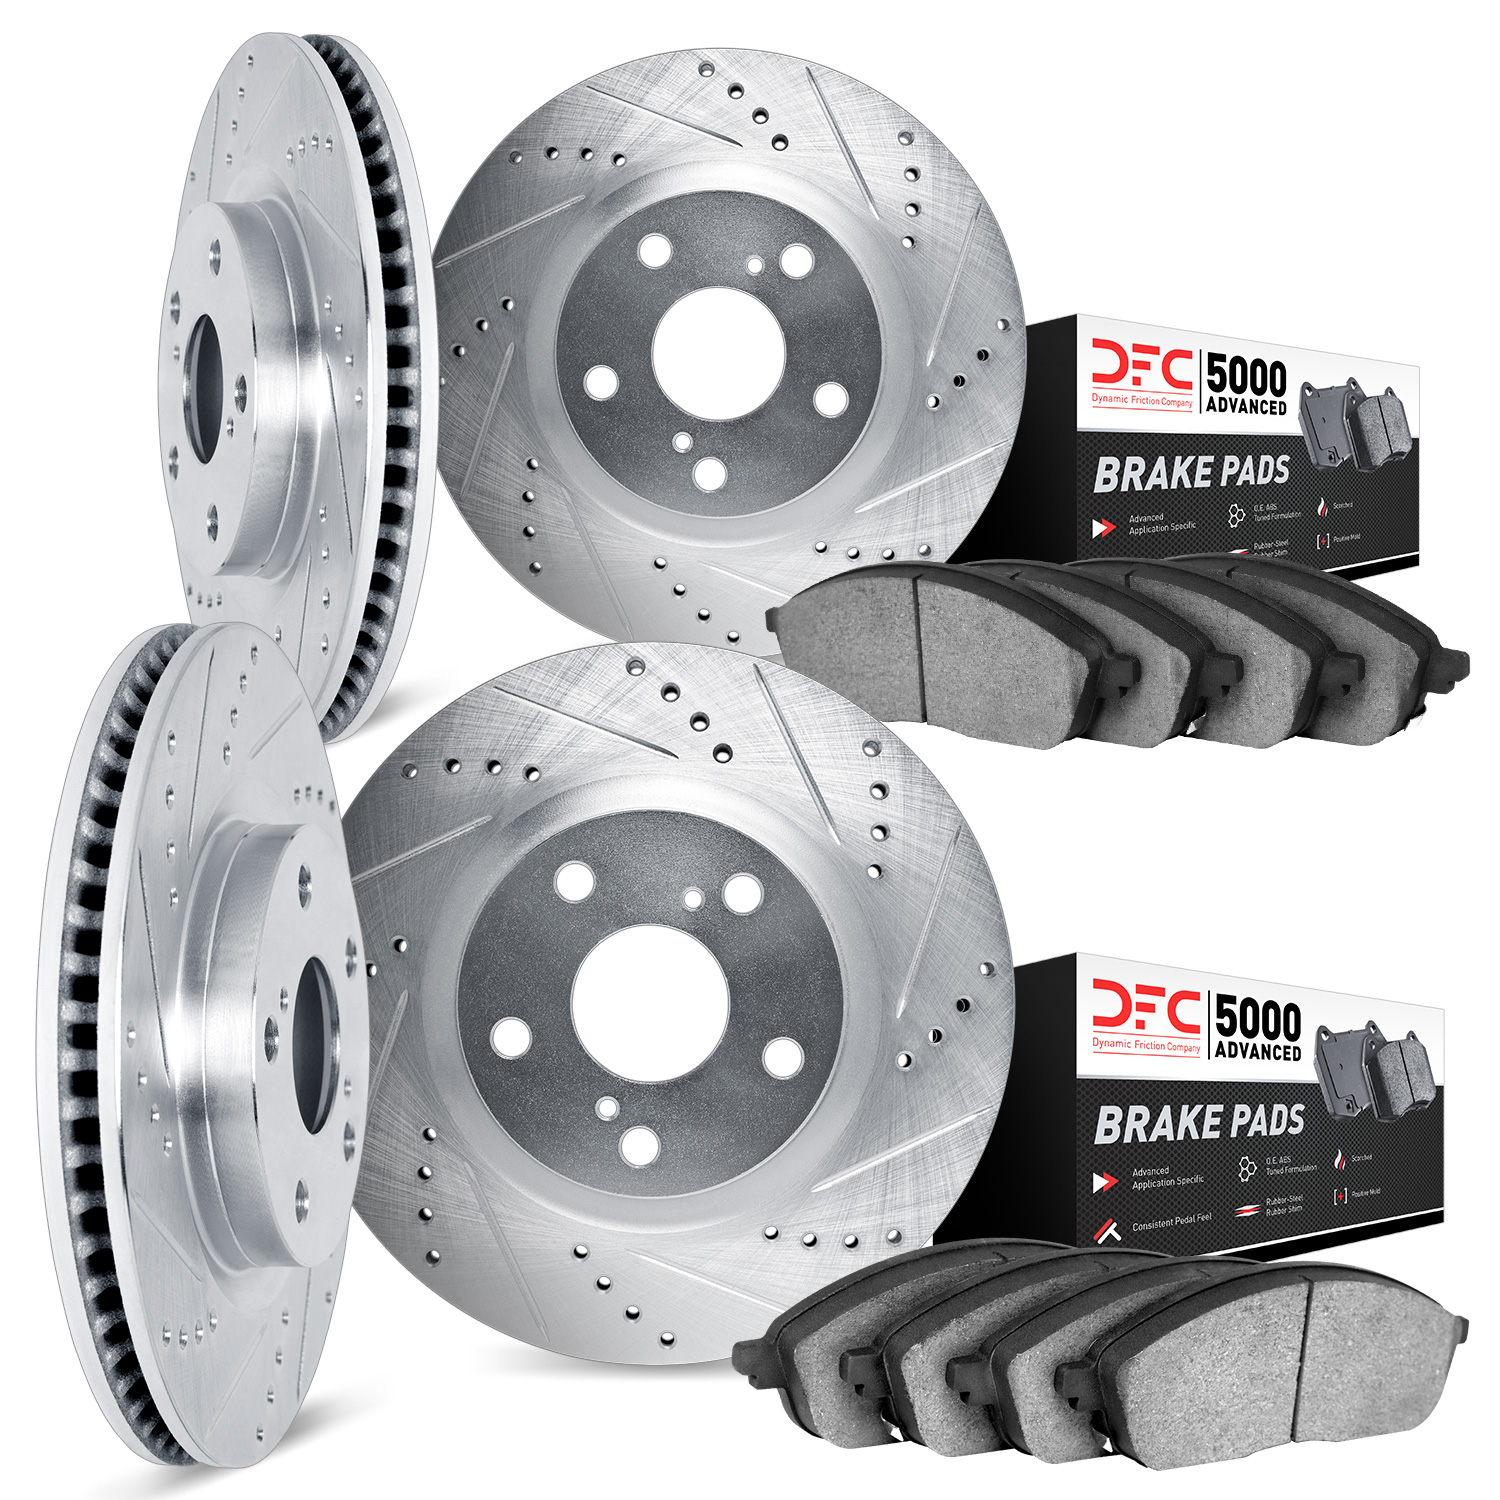 7504-13022 Drilled/Slotted Brake Rotors w/5000 Advanced Brake Pads Kit [Silver], Fits Select Subaru, Position: Front and Rear